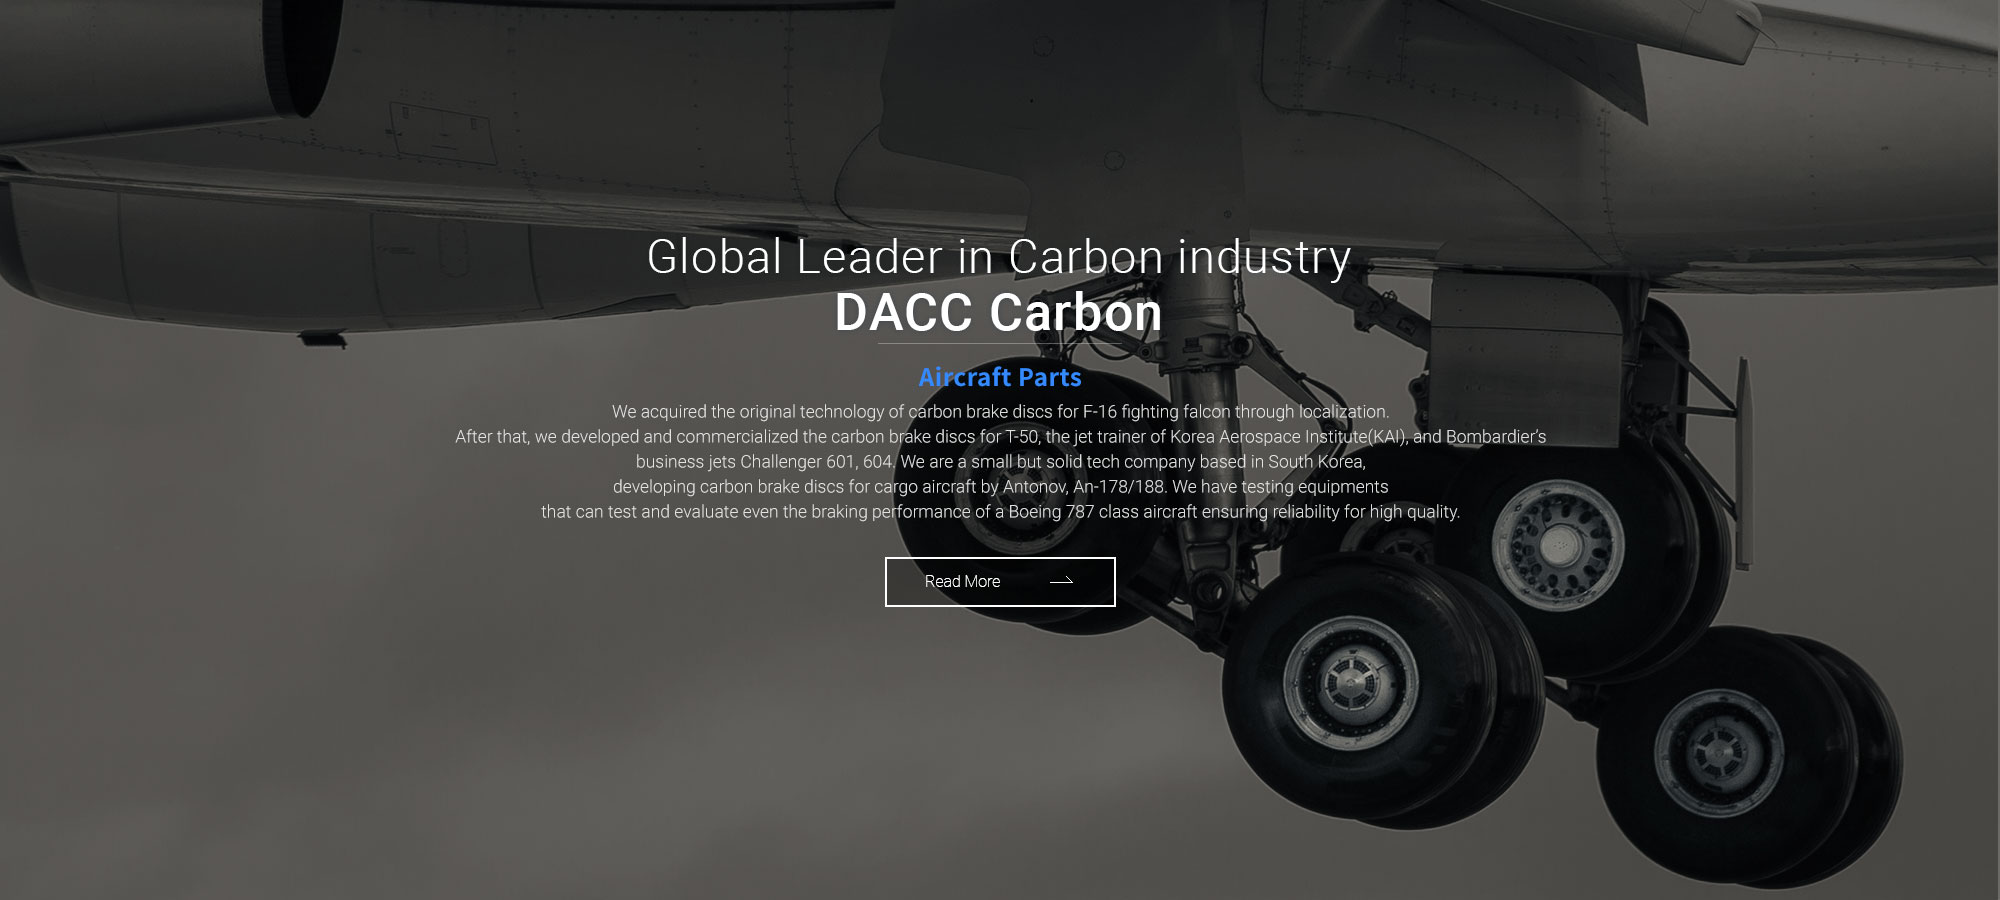 Global Leader in Carbon industry DACC Carbon
Aircraft Parts
We acquired the original technology of carbon brake disks for F-16 fighting falcon through localized research and development. 
After that, we developed and commercialized the carbon brake dis